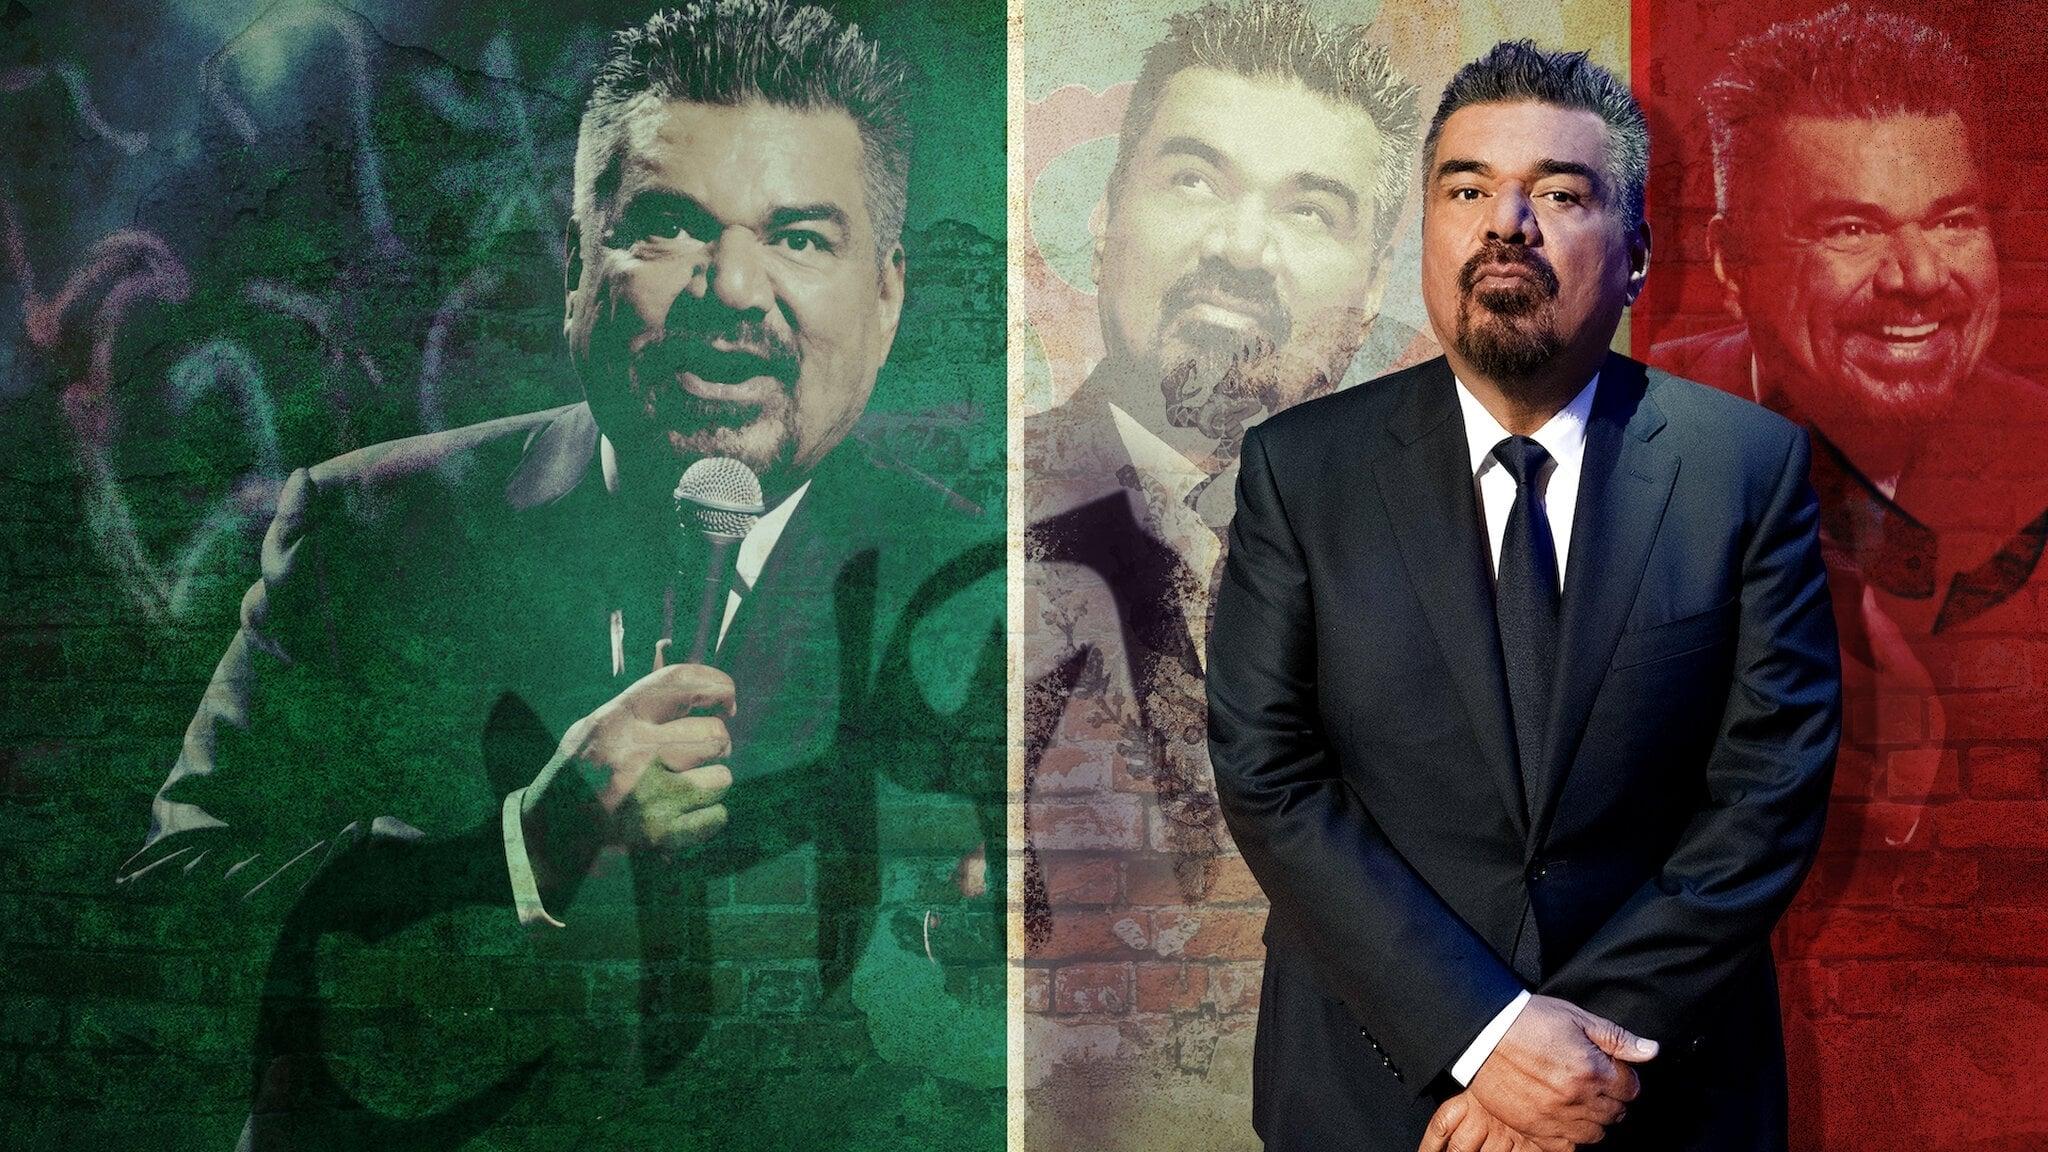 George Lopez: We'll Do It for Half backdrop